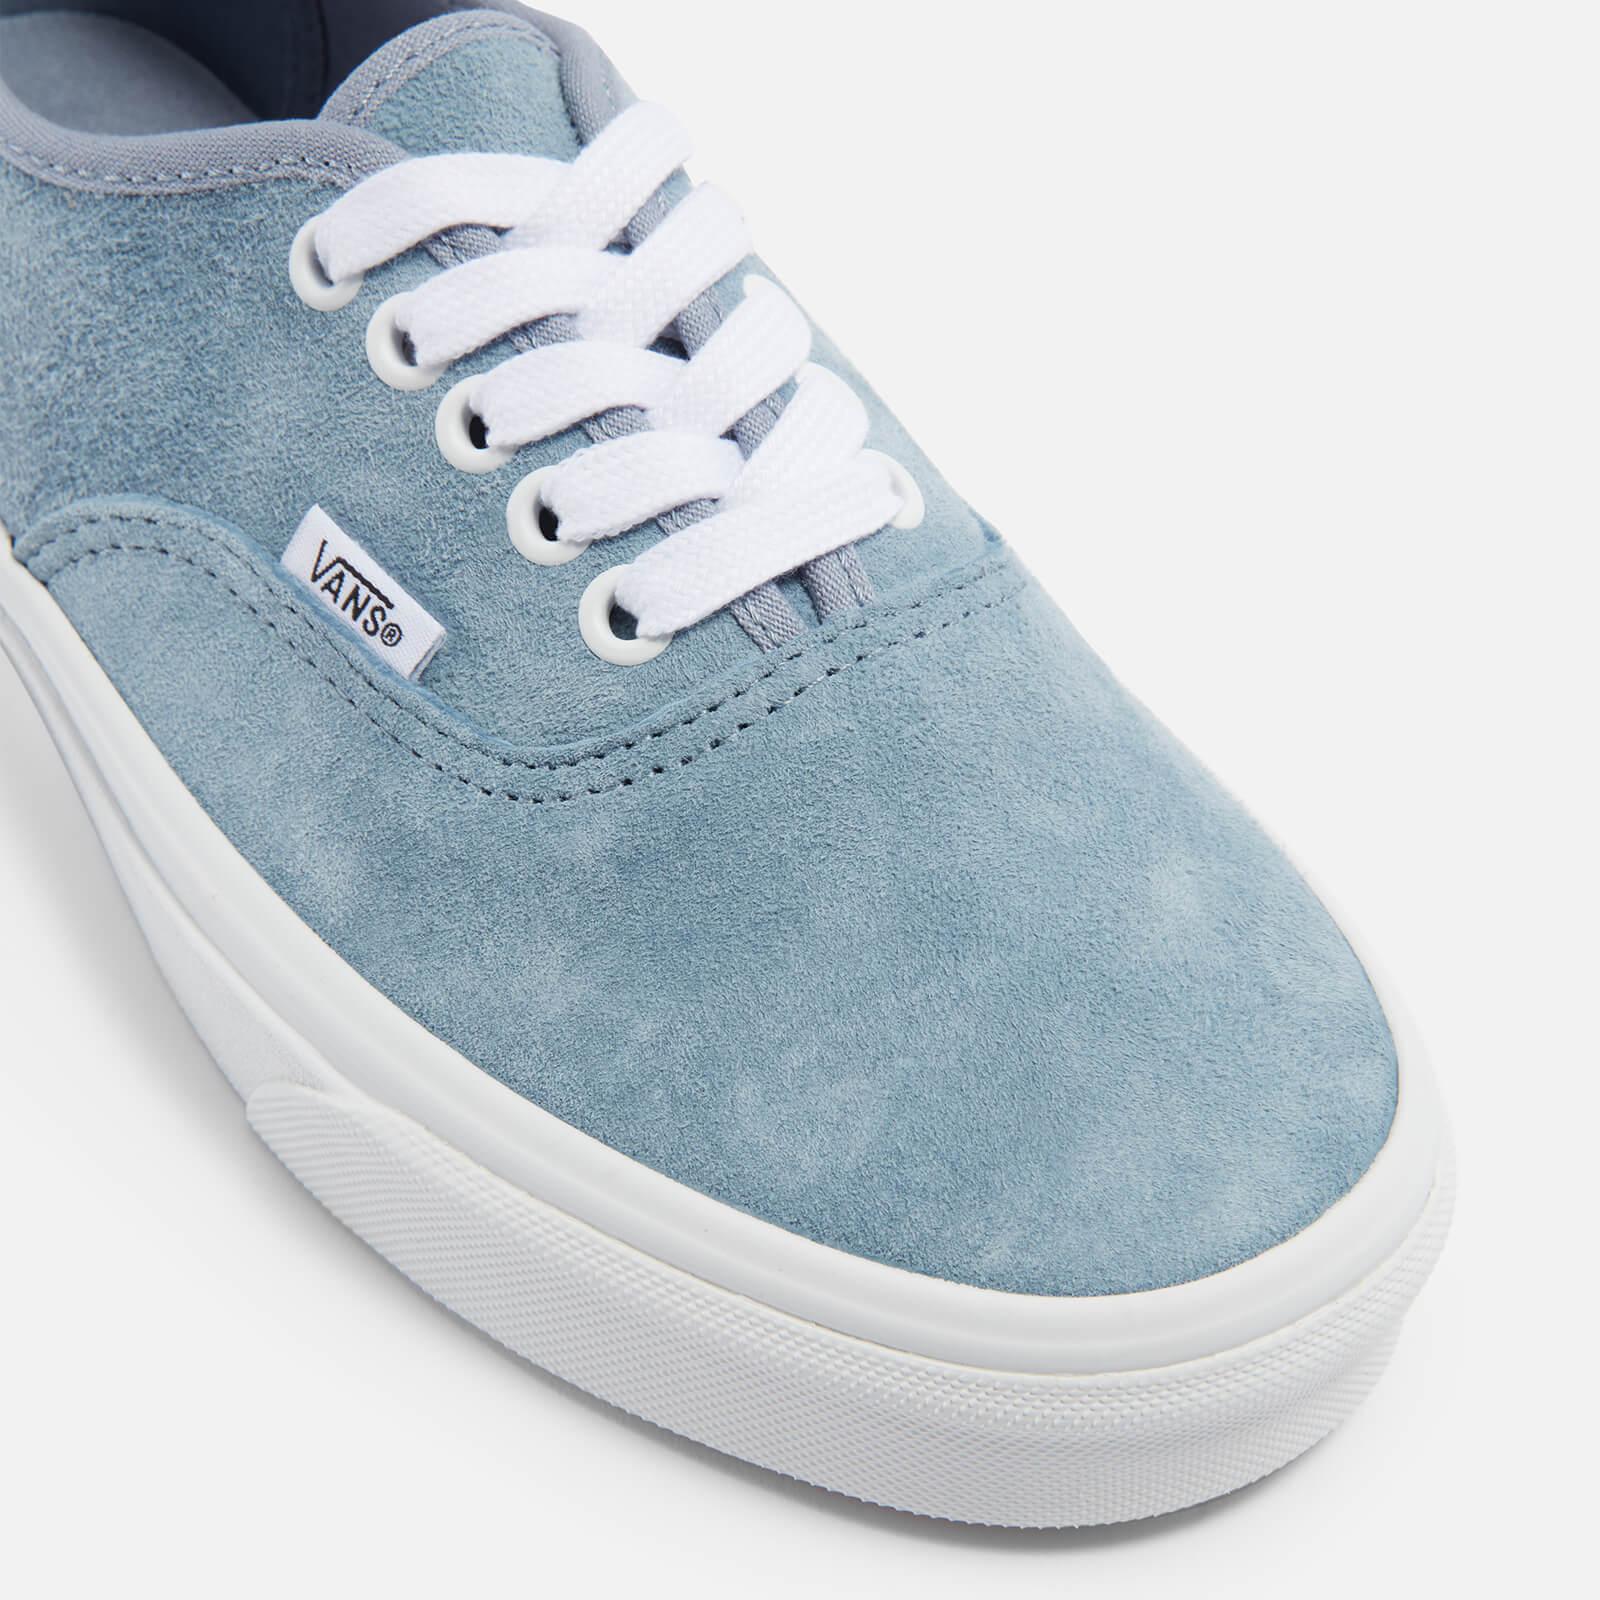 Vans Authentic Suede Trainers in Blue | Lyst